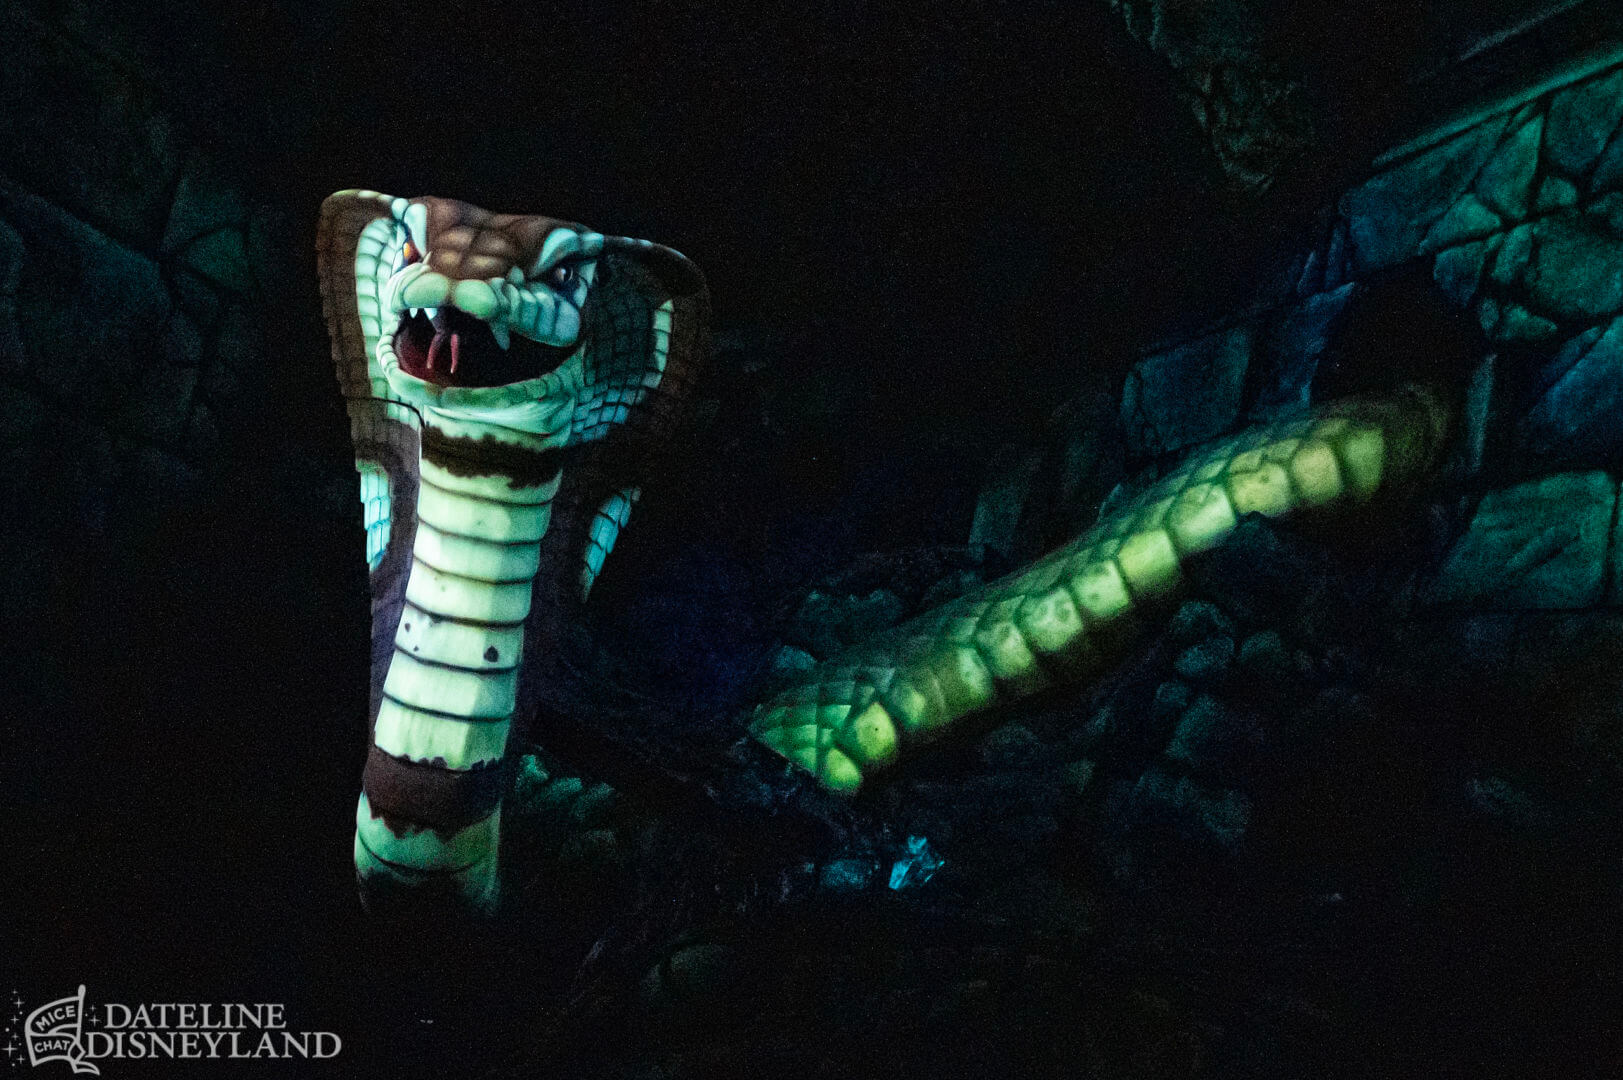 Disney parks boss previews Indiana Jones replacement for Dinosaur ride